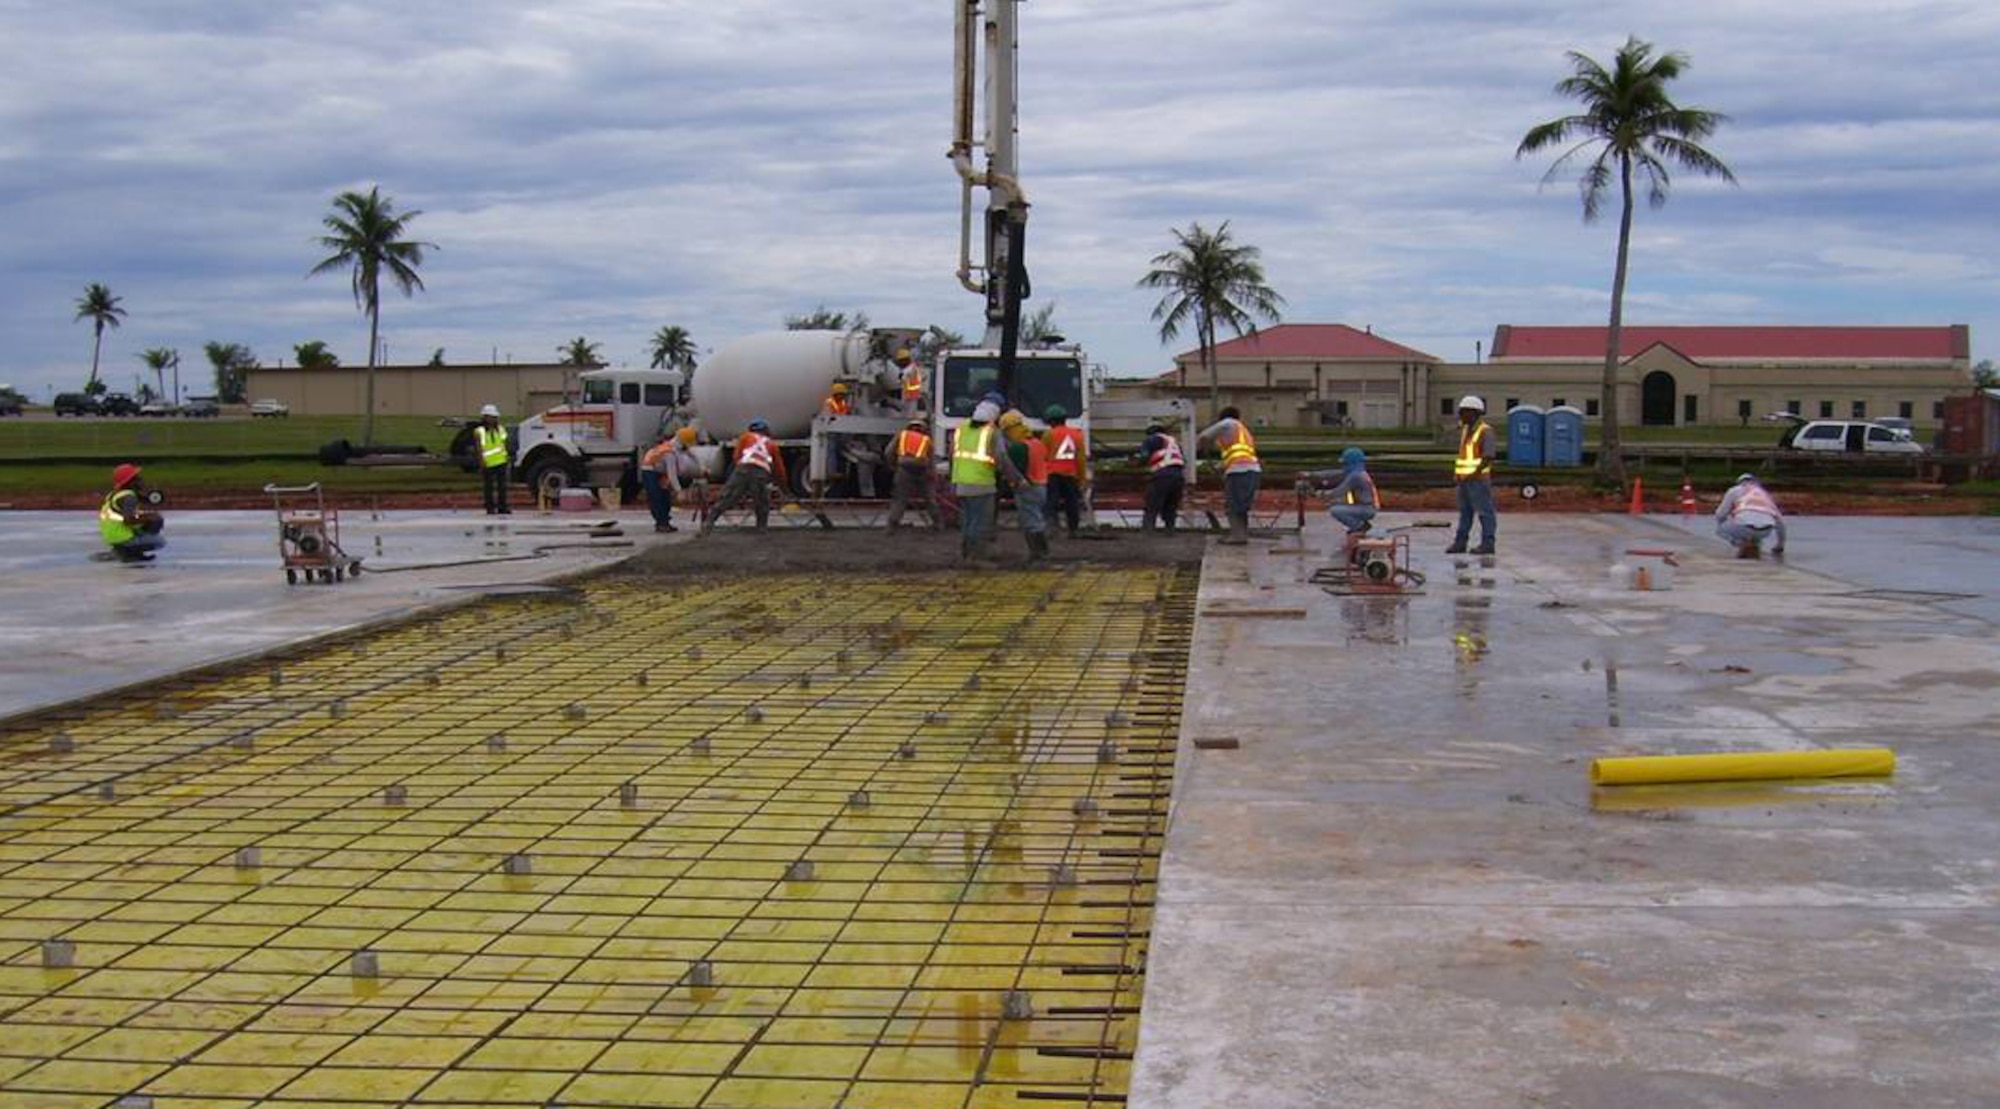 ANDERSEN AIR FORCE BASE, Guam - Contractors poured concrete into the new base exchange's foundation Aug. 7.  Construction on the 165,000 sq ft facility began Jan. 18, 2007.  The project is scheduled to be completed Aug. 28, 2008.  The site is located next to the base's medical center. (U.S. Air Force photo)